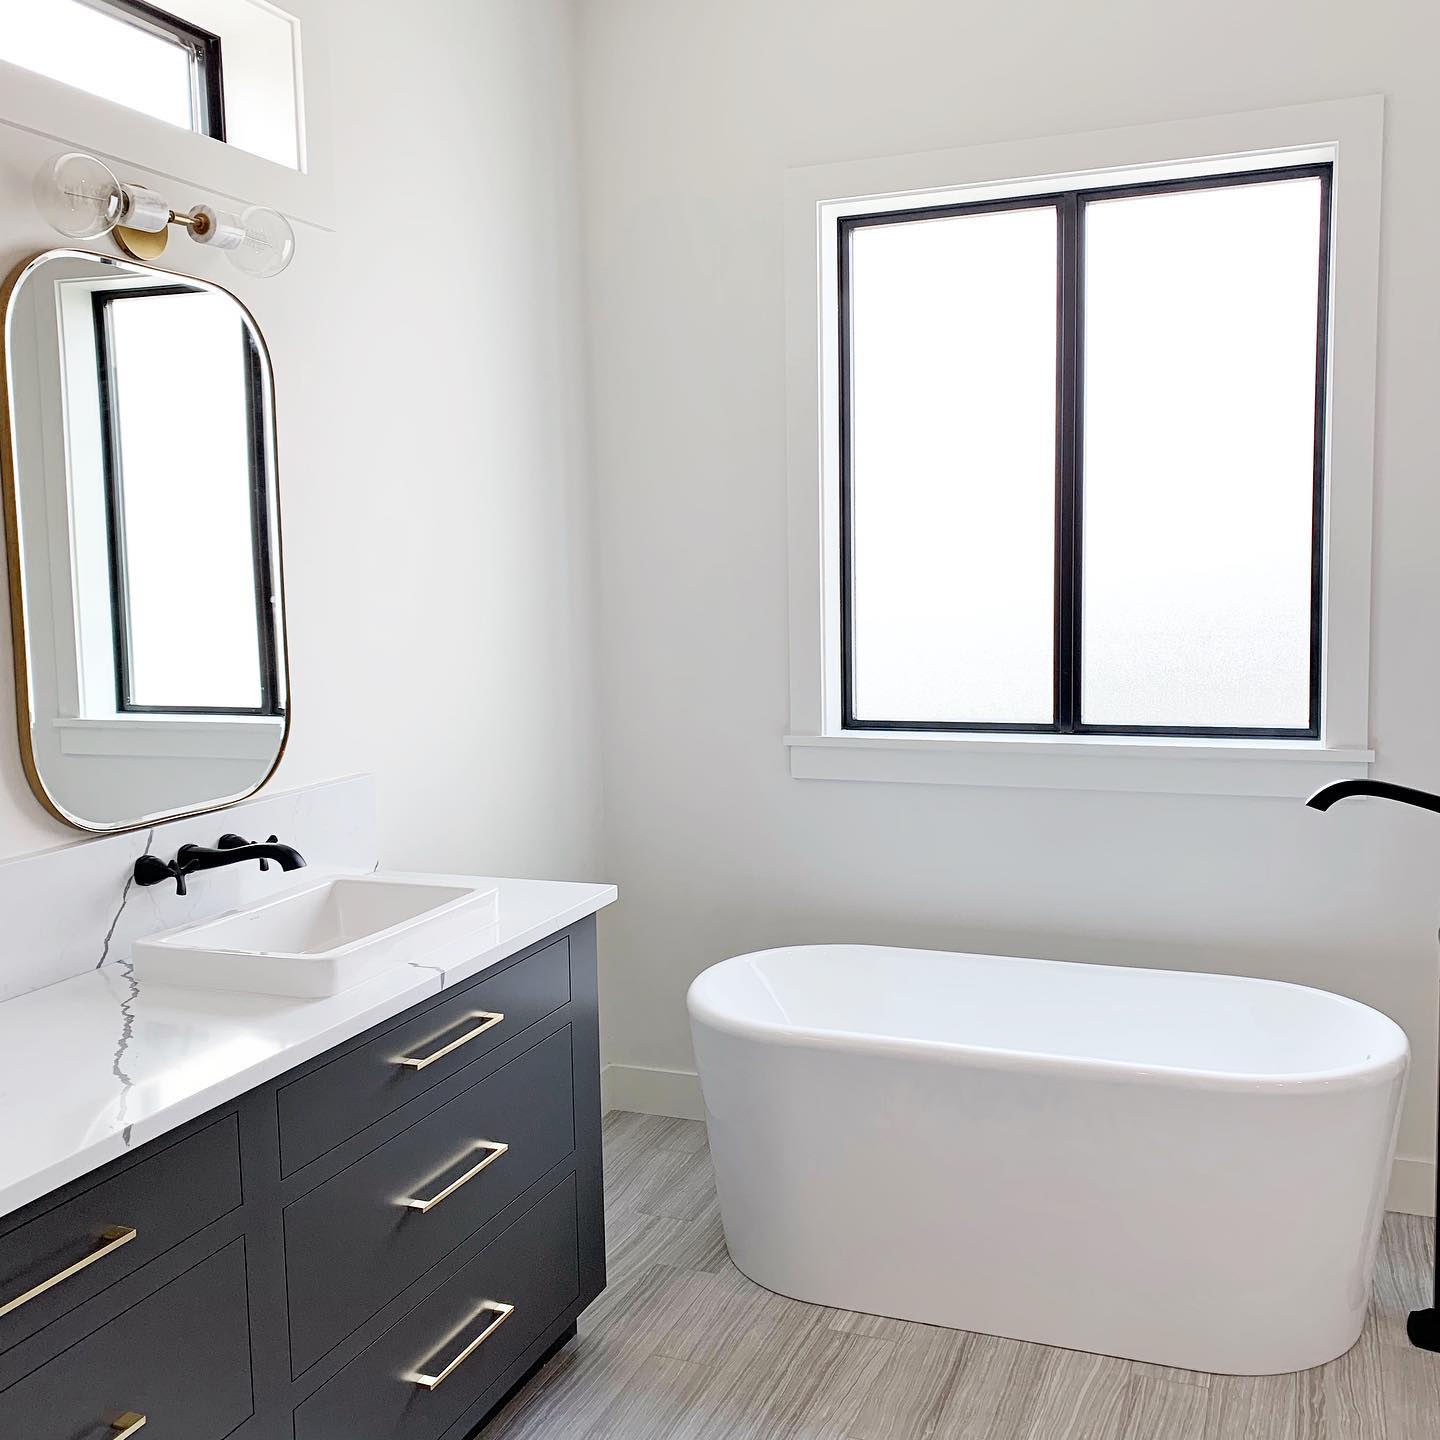 Black and white bathroom features white tub with black sliding window overhead